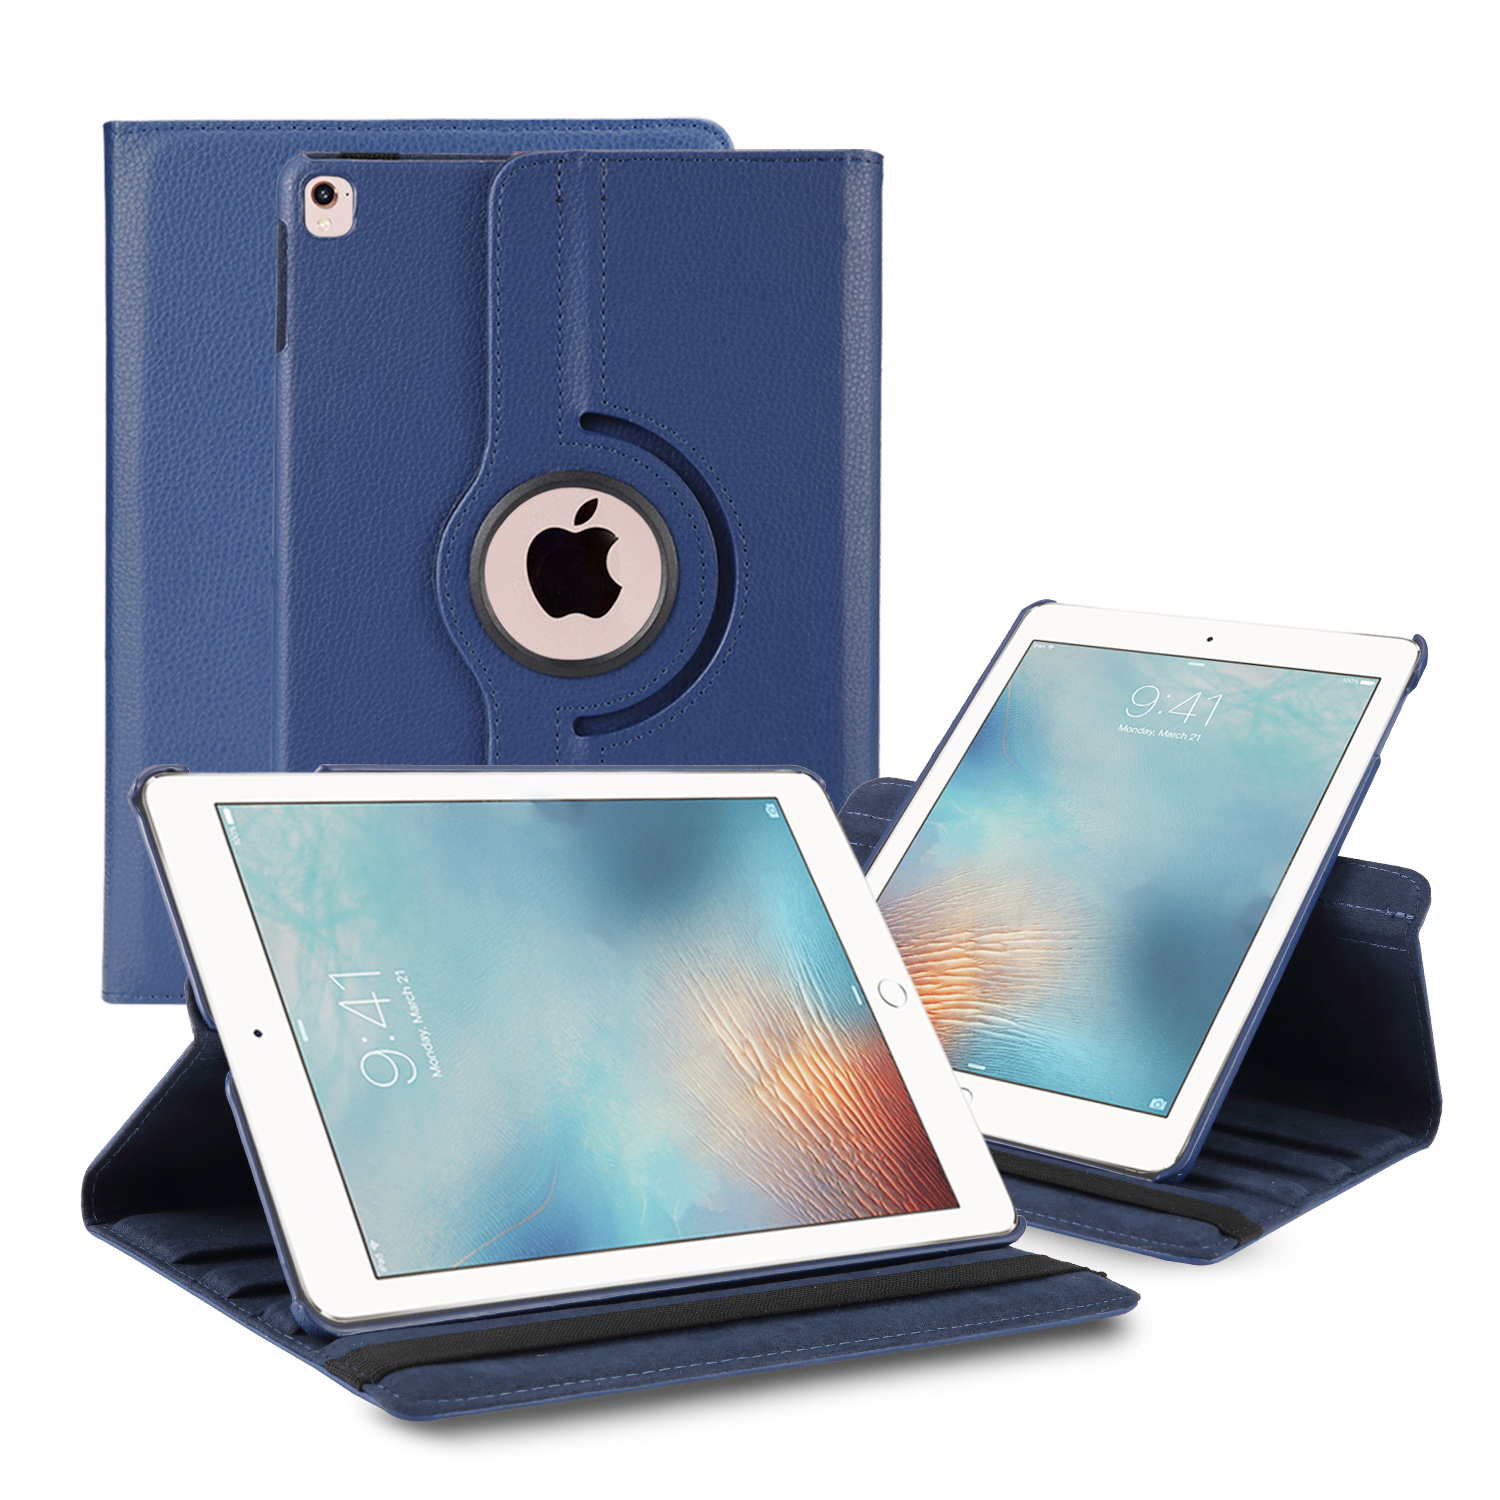 ''360 Degree Rotation Flip Cover LEATHER Kickstand Protective Cover Case for Apple iPad 9.7 [2017],''''